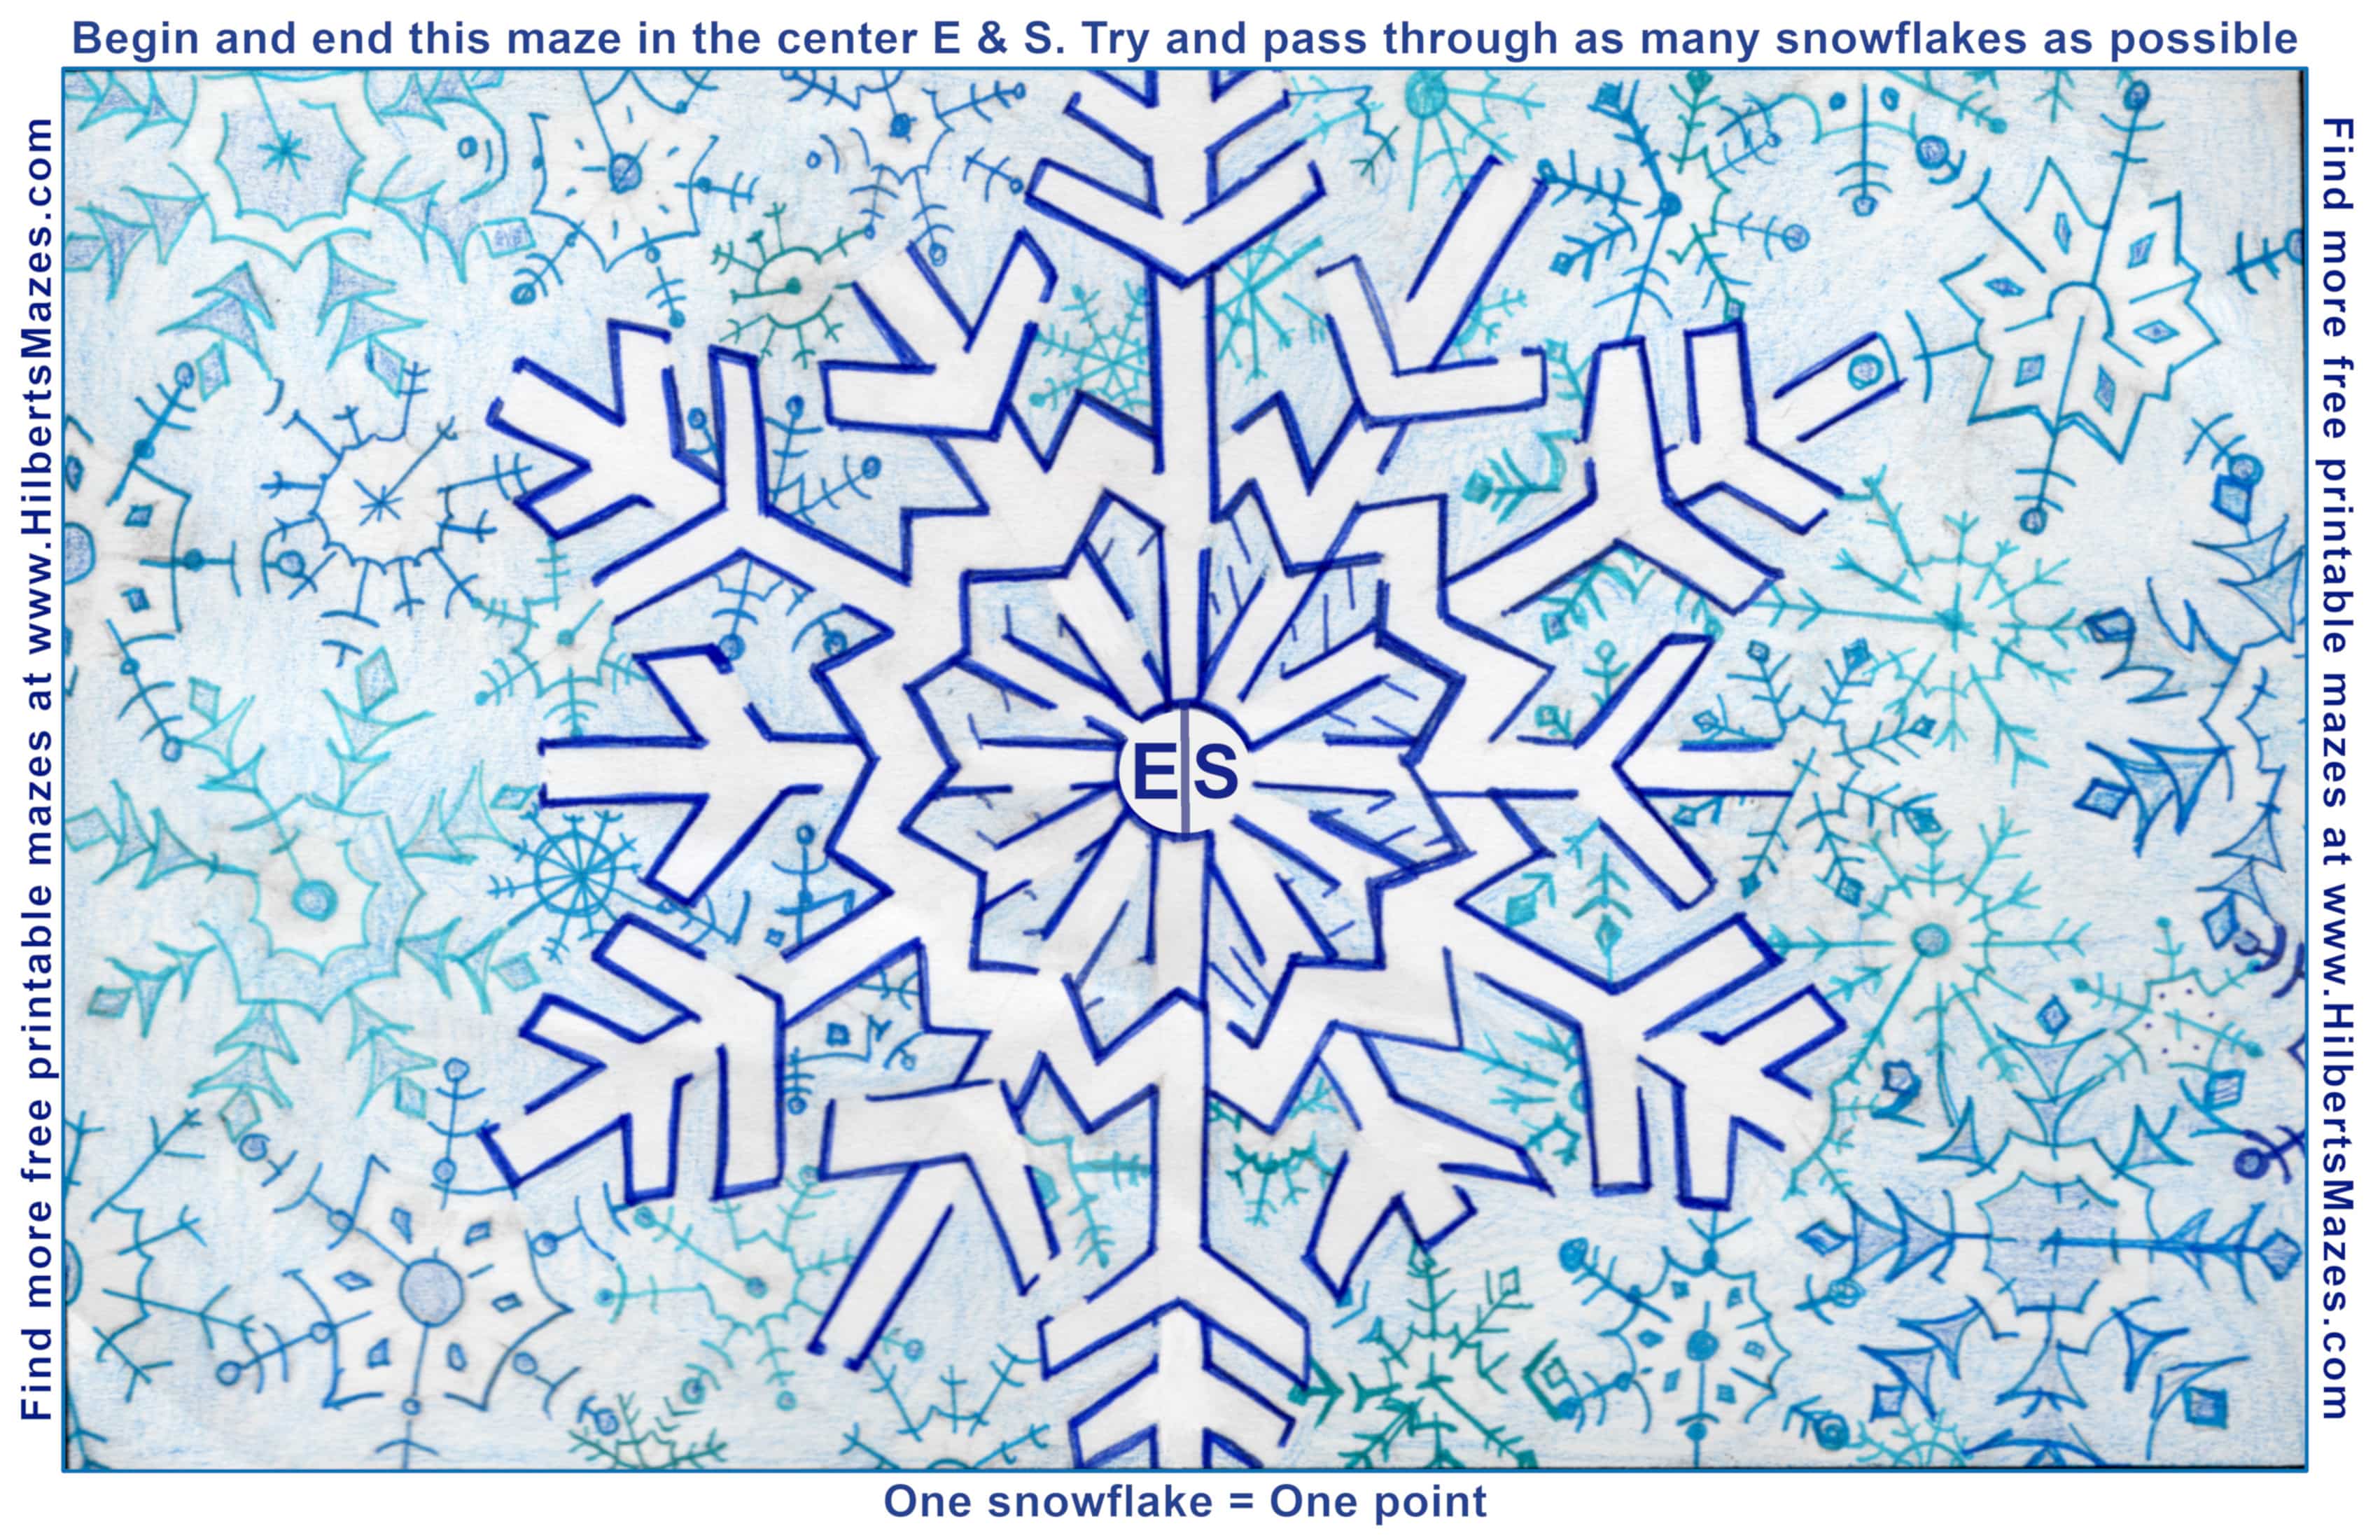 Free Printable Hand Drawn Snowflake Maze. Easily downloadable printable PDF format. Great Mazes for both kids & adults very challenging but fun.